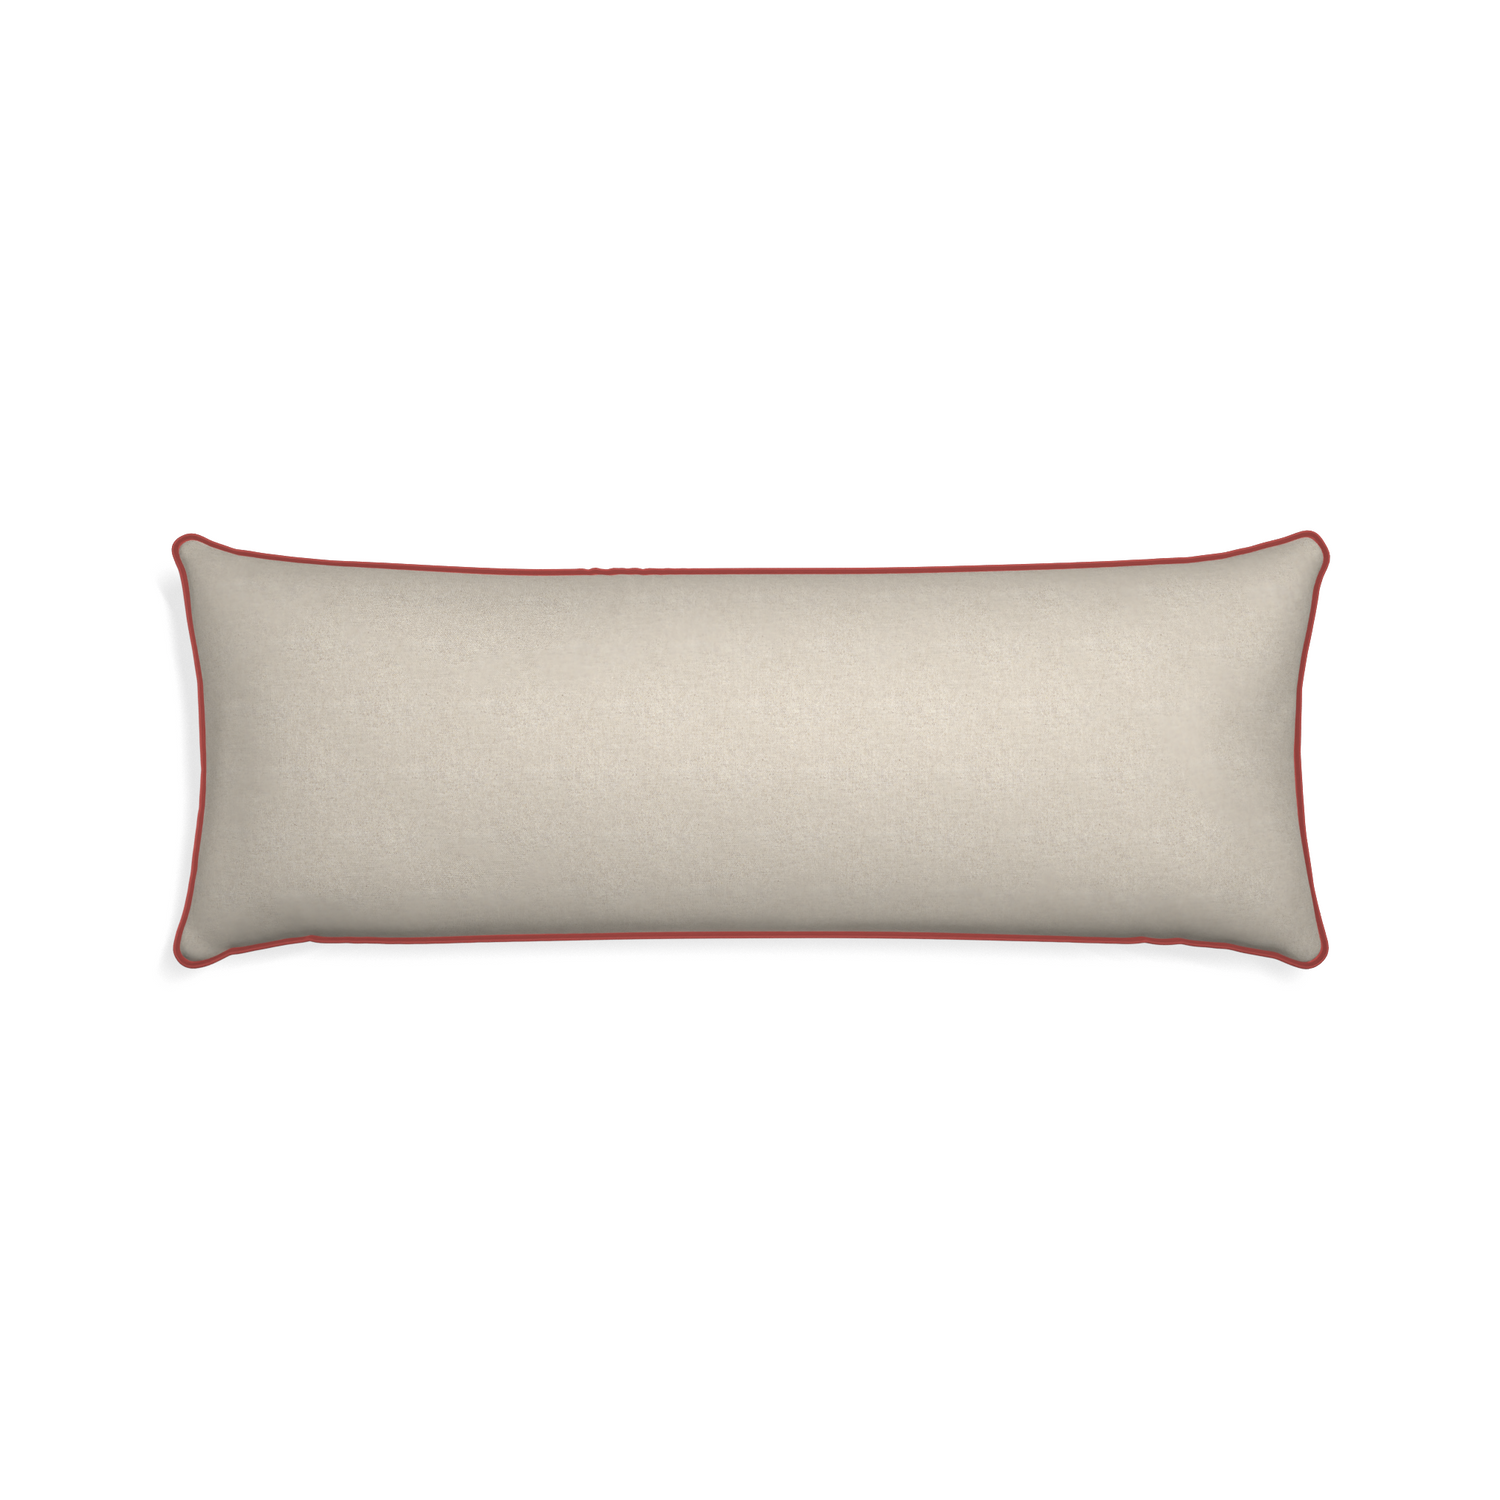 Xl-lumbar oat custom pillow with c piping on white background